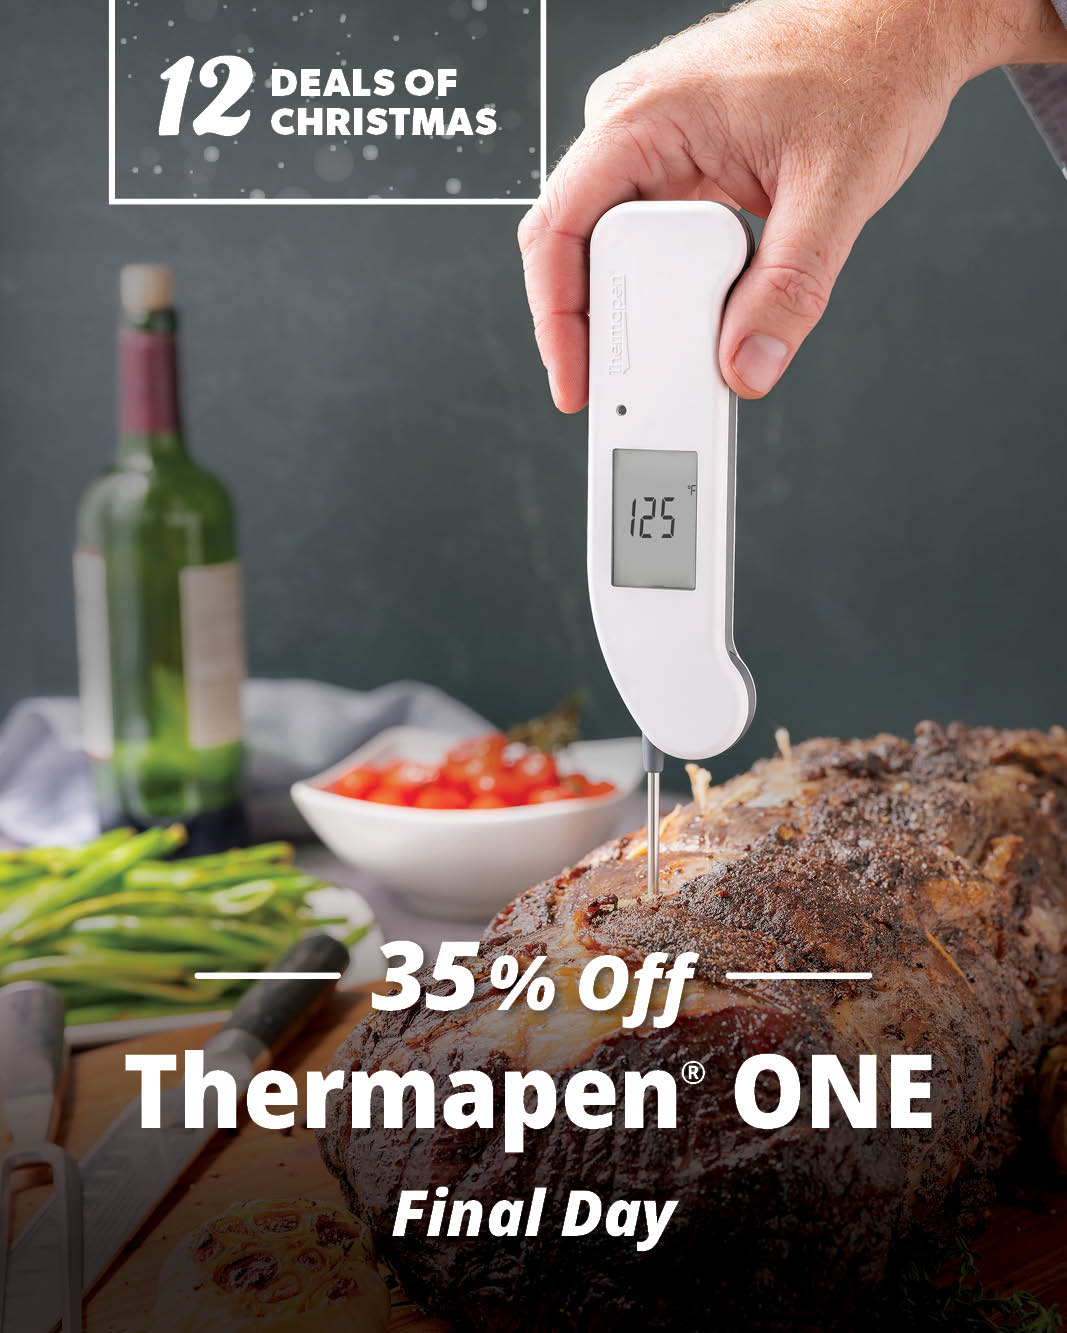 https://mediacdn.espssl.com/9790/Shared/2023%20-%2012%20Days%20of%20Christmas/(Hero)%20Thermapen%20ONE%20-%20In%20Use%20-%2012%20Days%20of%20Christmas%20-%20Final%20Day.jpg